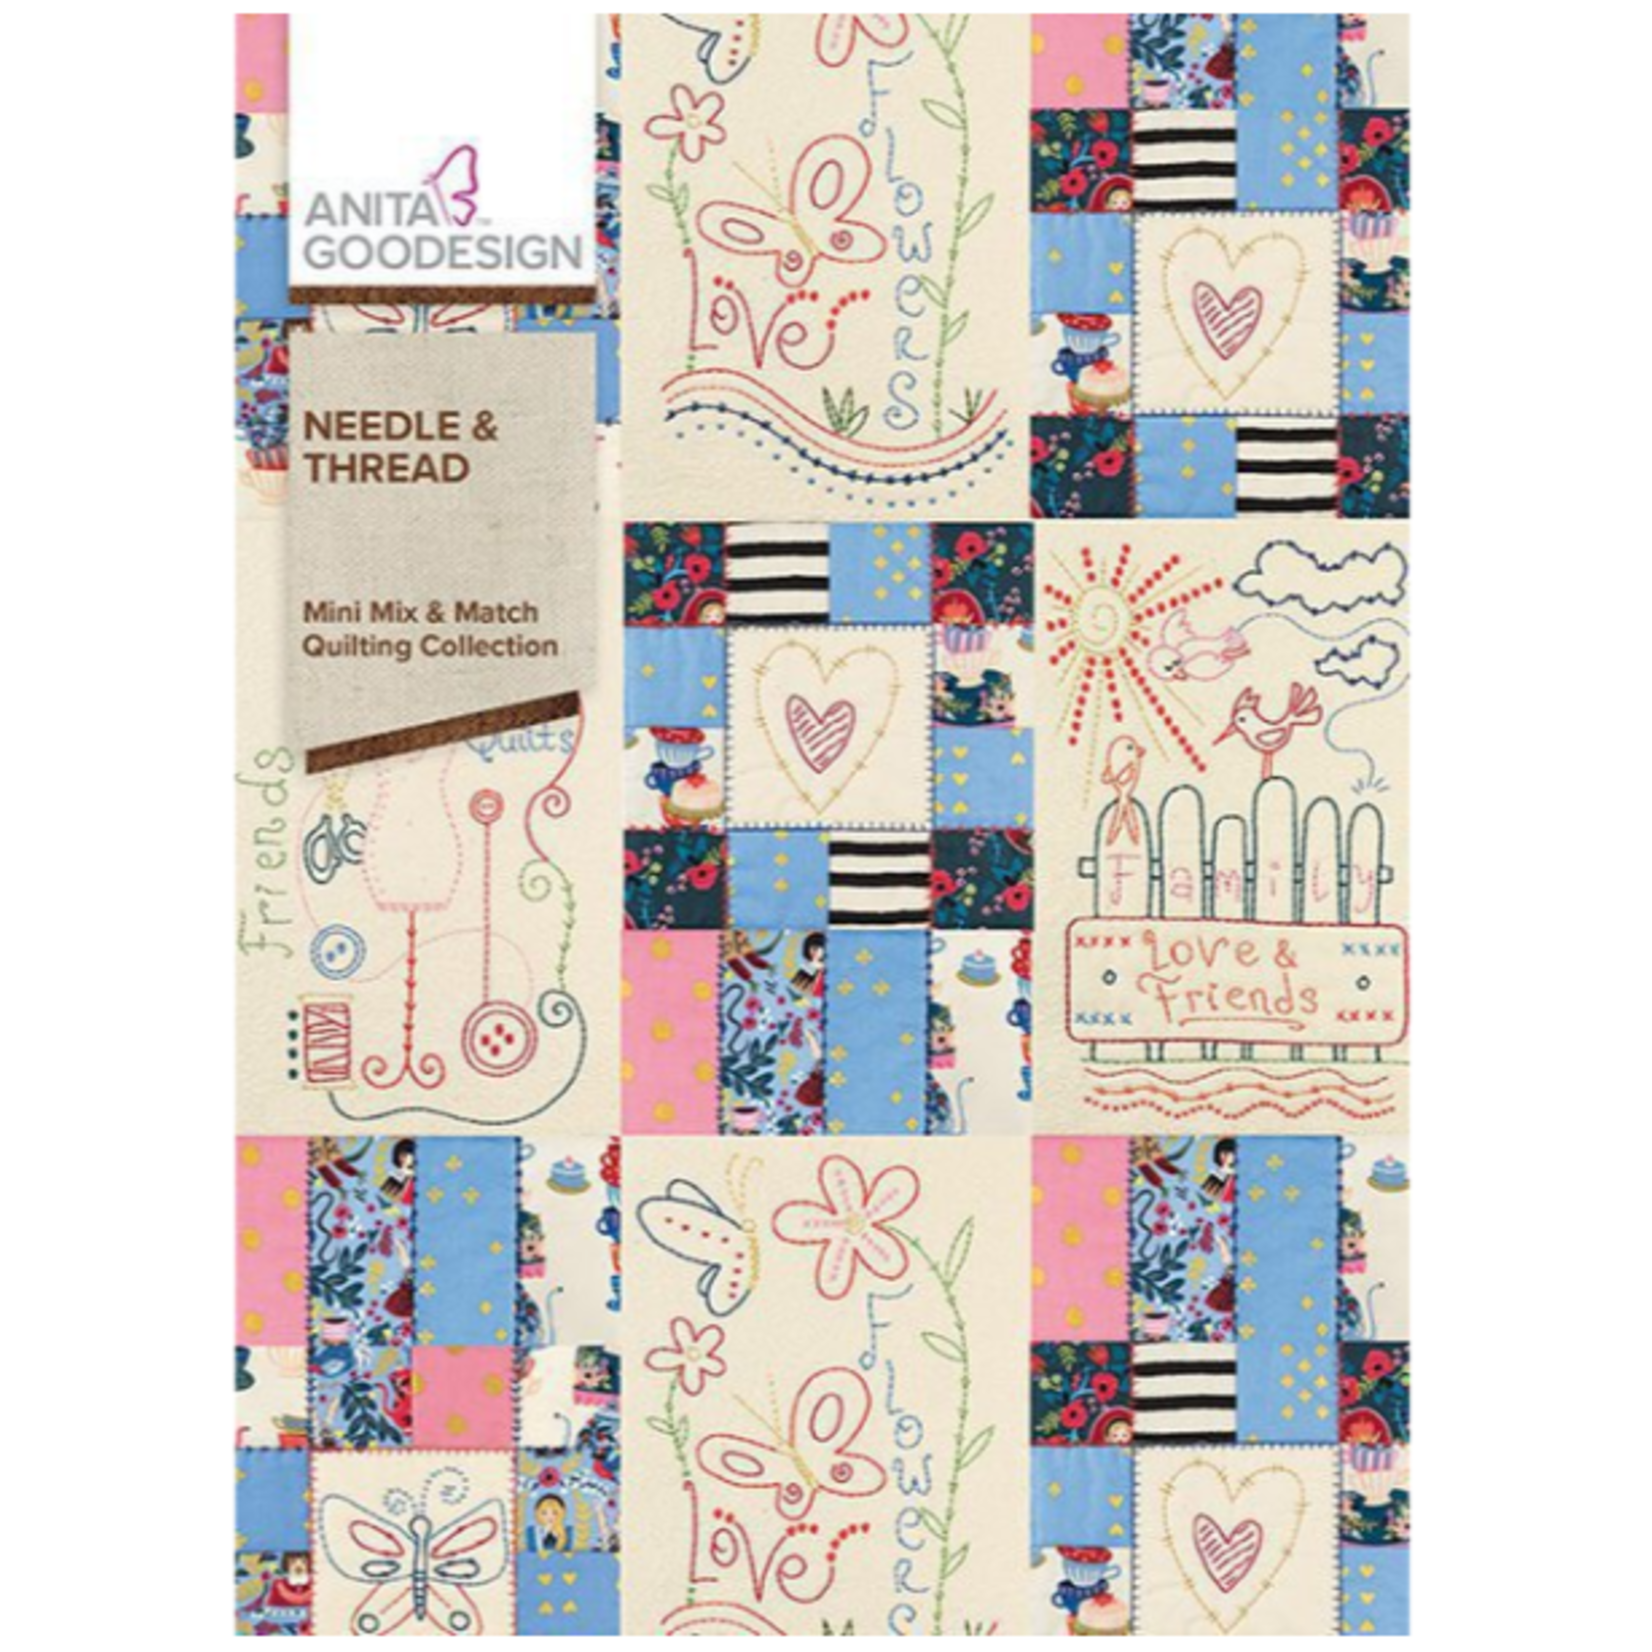 Anita Goodesign Needle and Thread Mini Mix & Match Quilting Collection Hoop sizes 6” x 10” to 9.5” x 14”